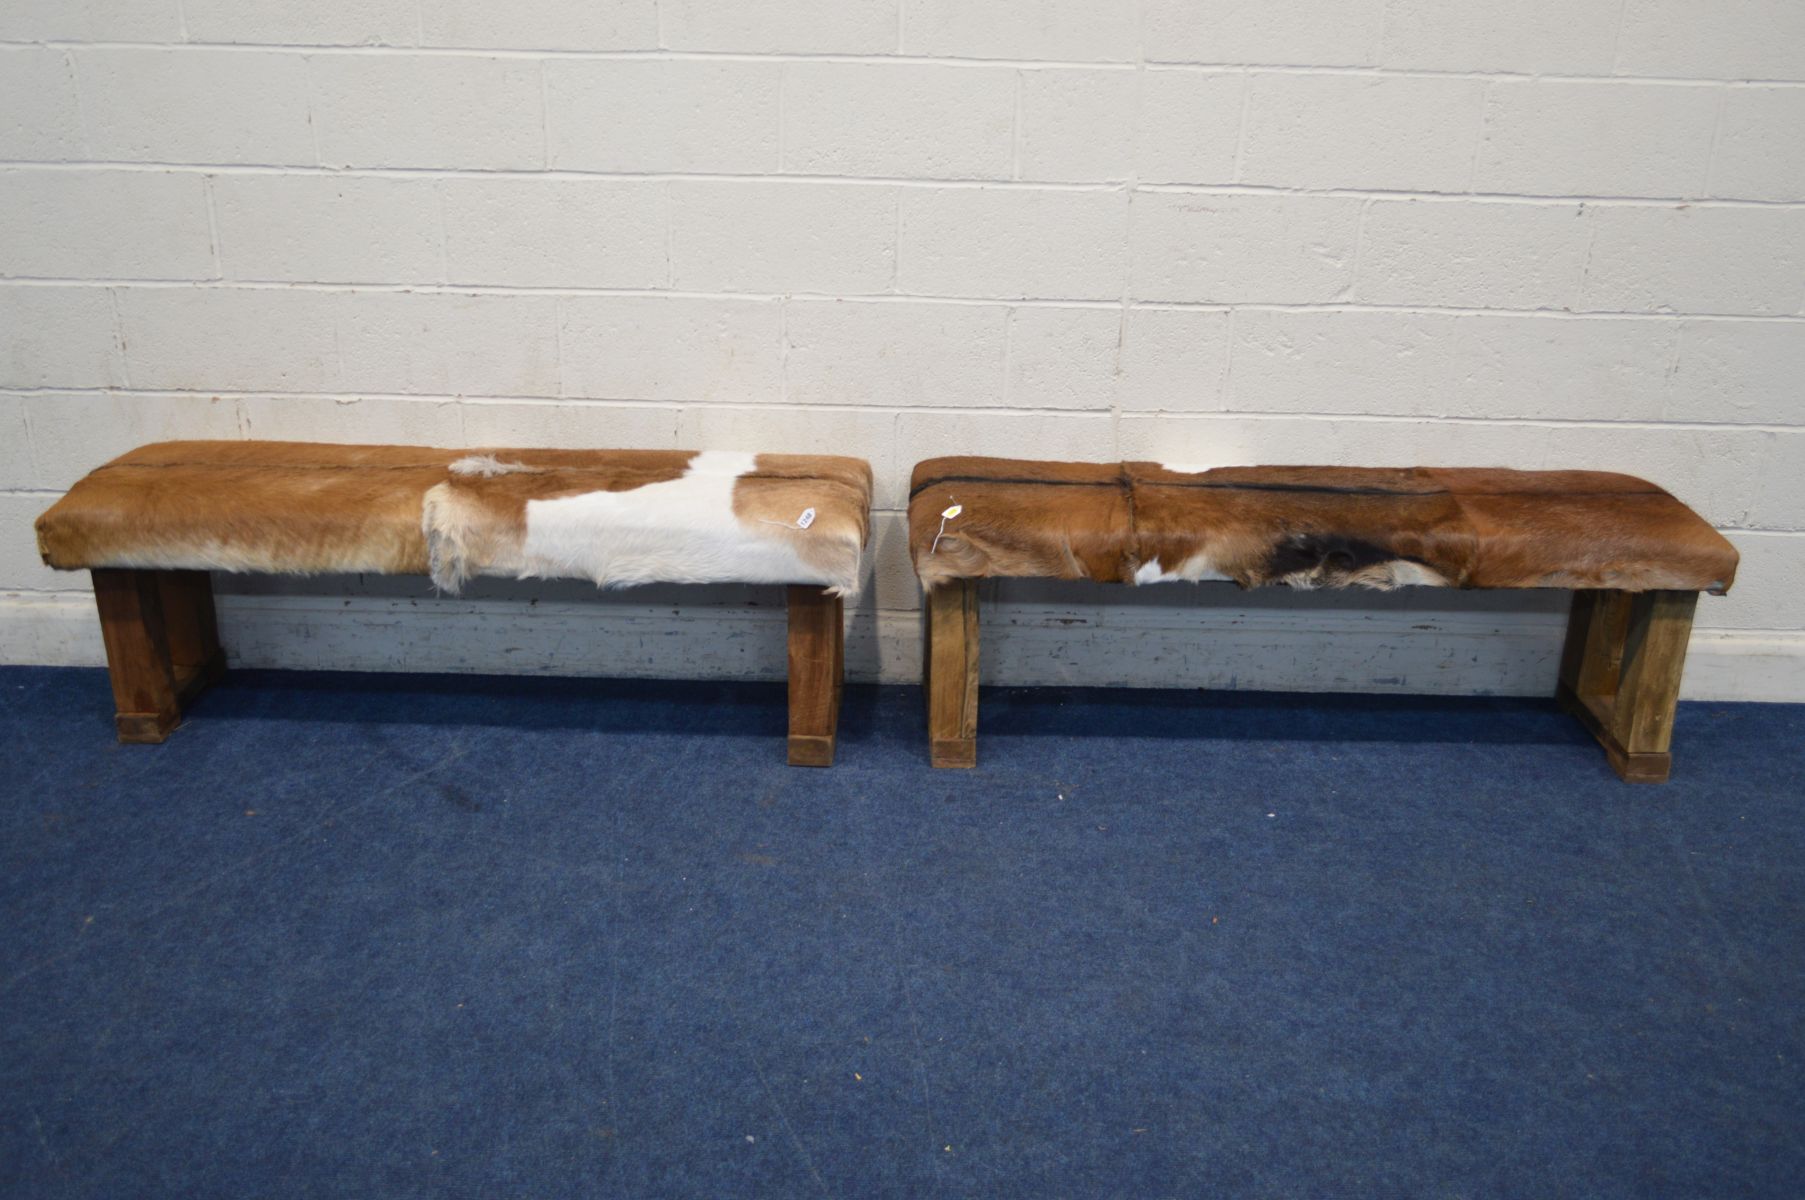 A PAIR OF RUSTIC RECTANGULAR STOOLS with animal hide seat covers, width 152cm x depth 44cm x